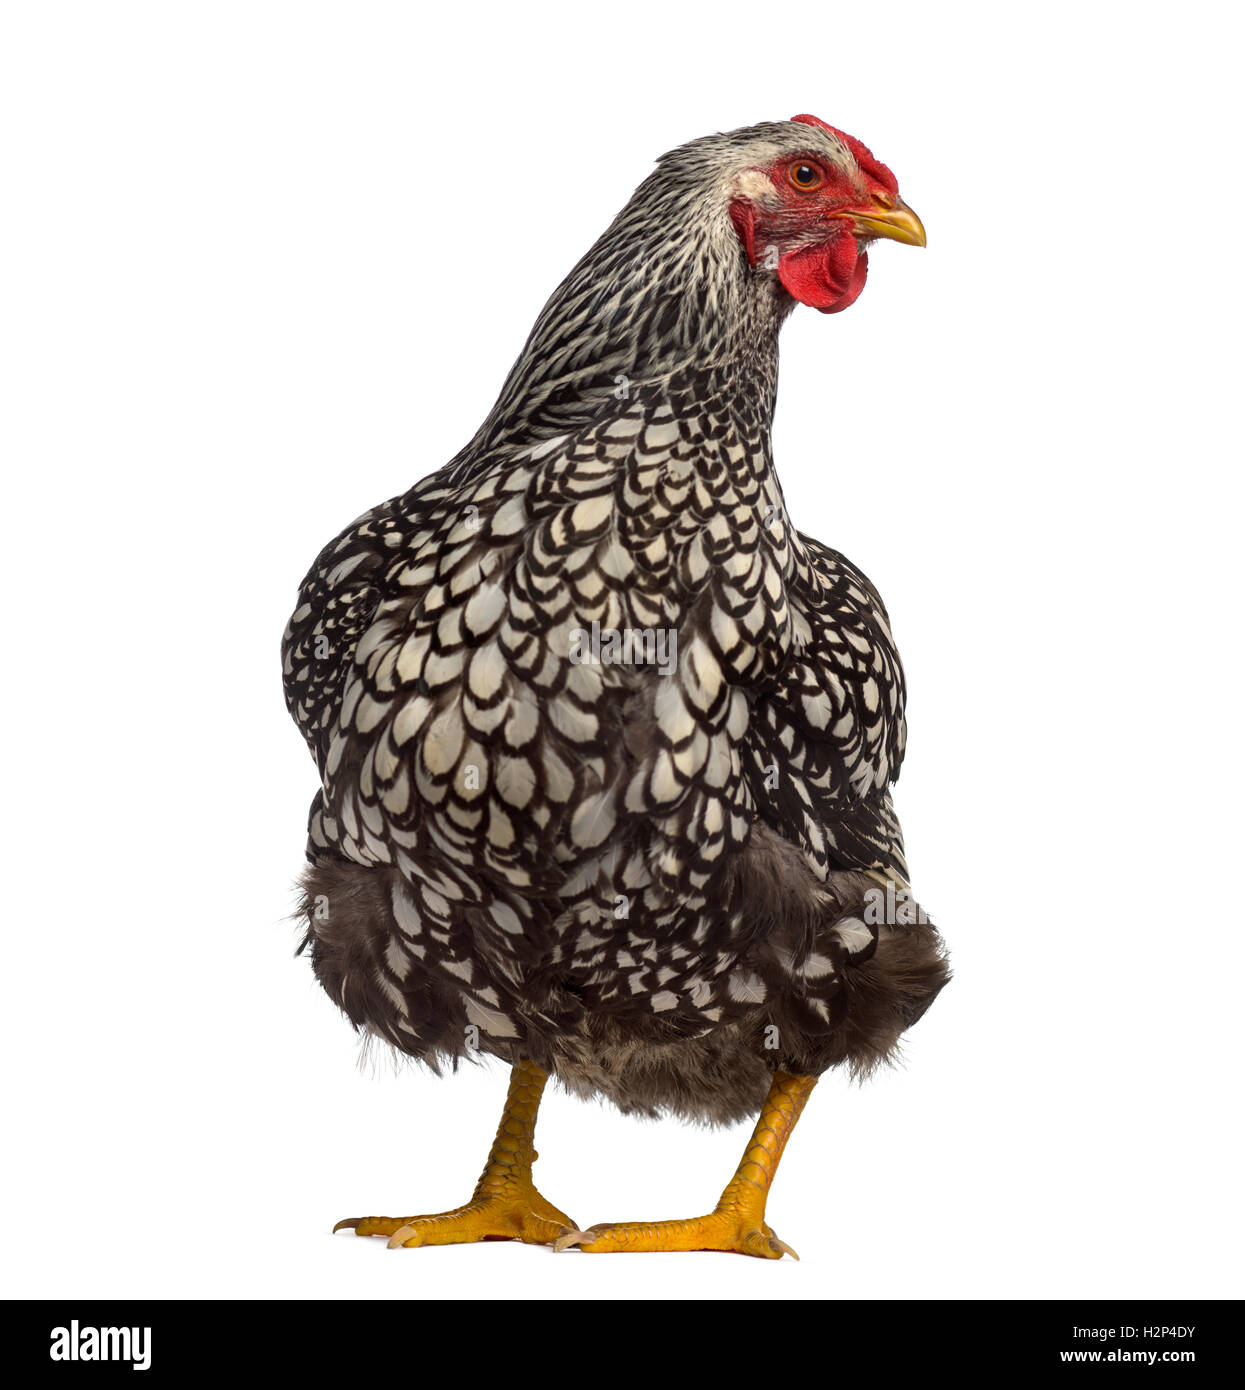 Rear view of a Wyandotte chicken isolated on white Stock Photo